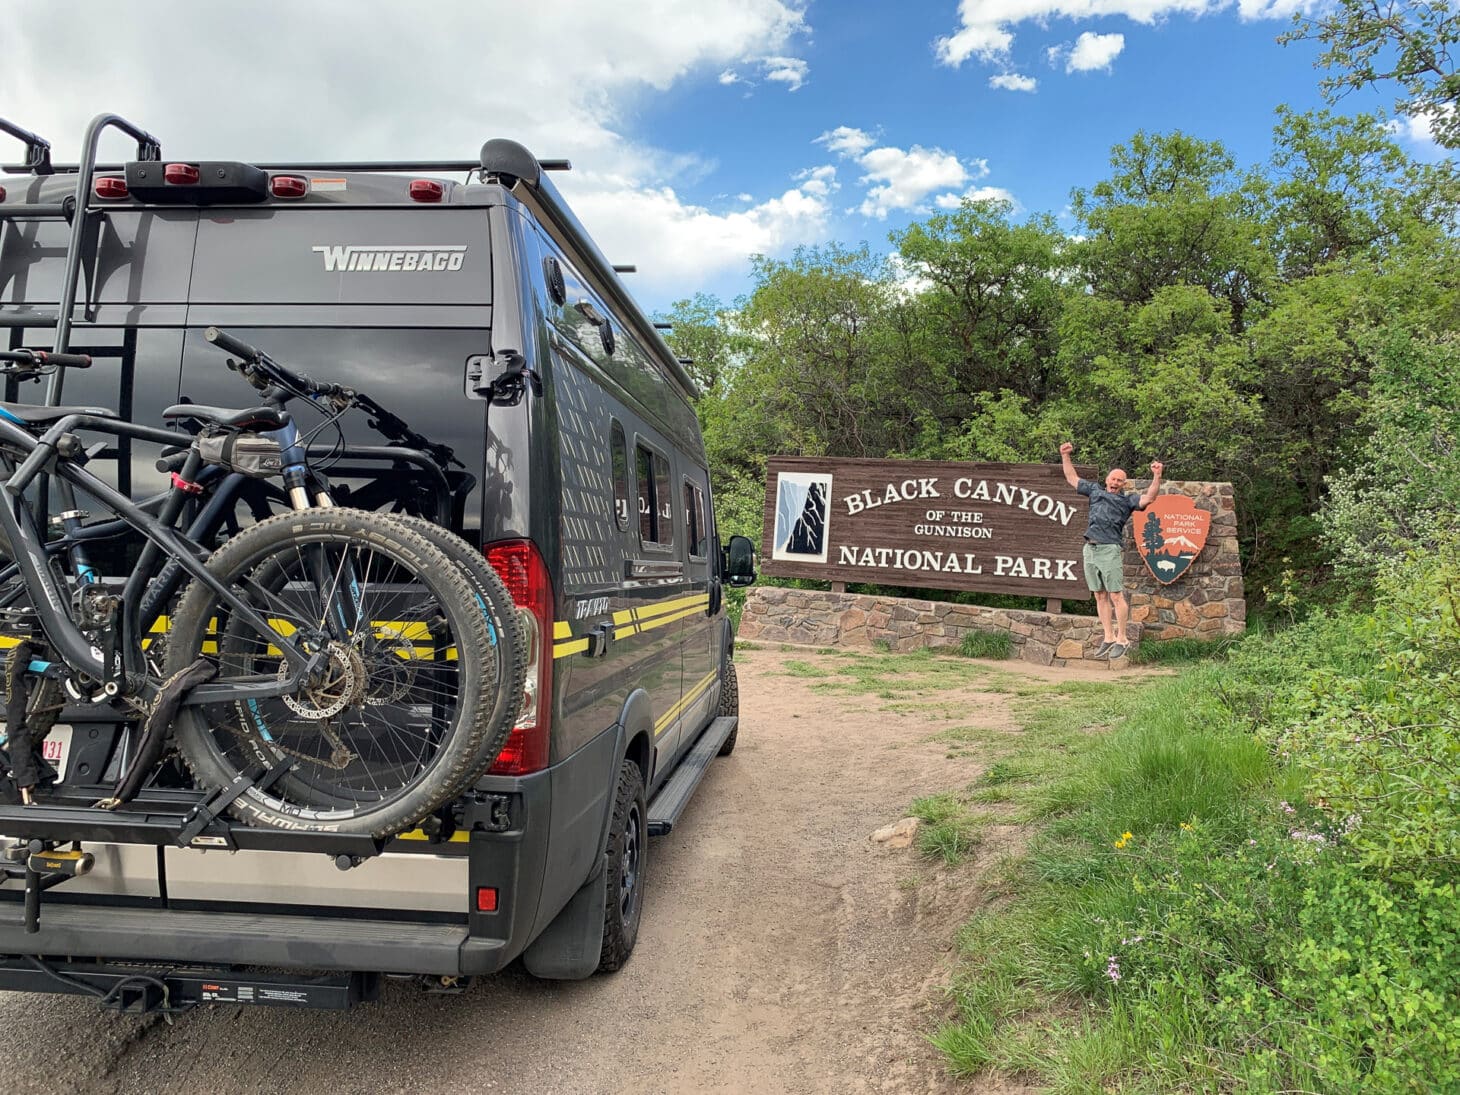 A rugged, black Class B RV stands at the entrance to Black Canyon of the Gunnison National Park in Colorado.